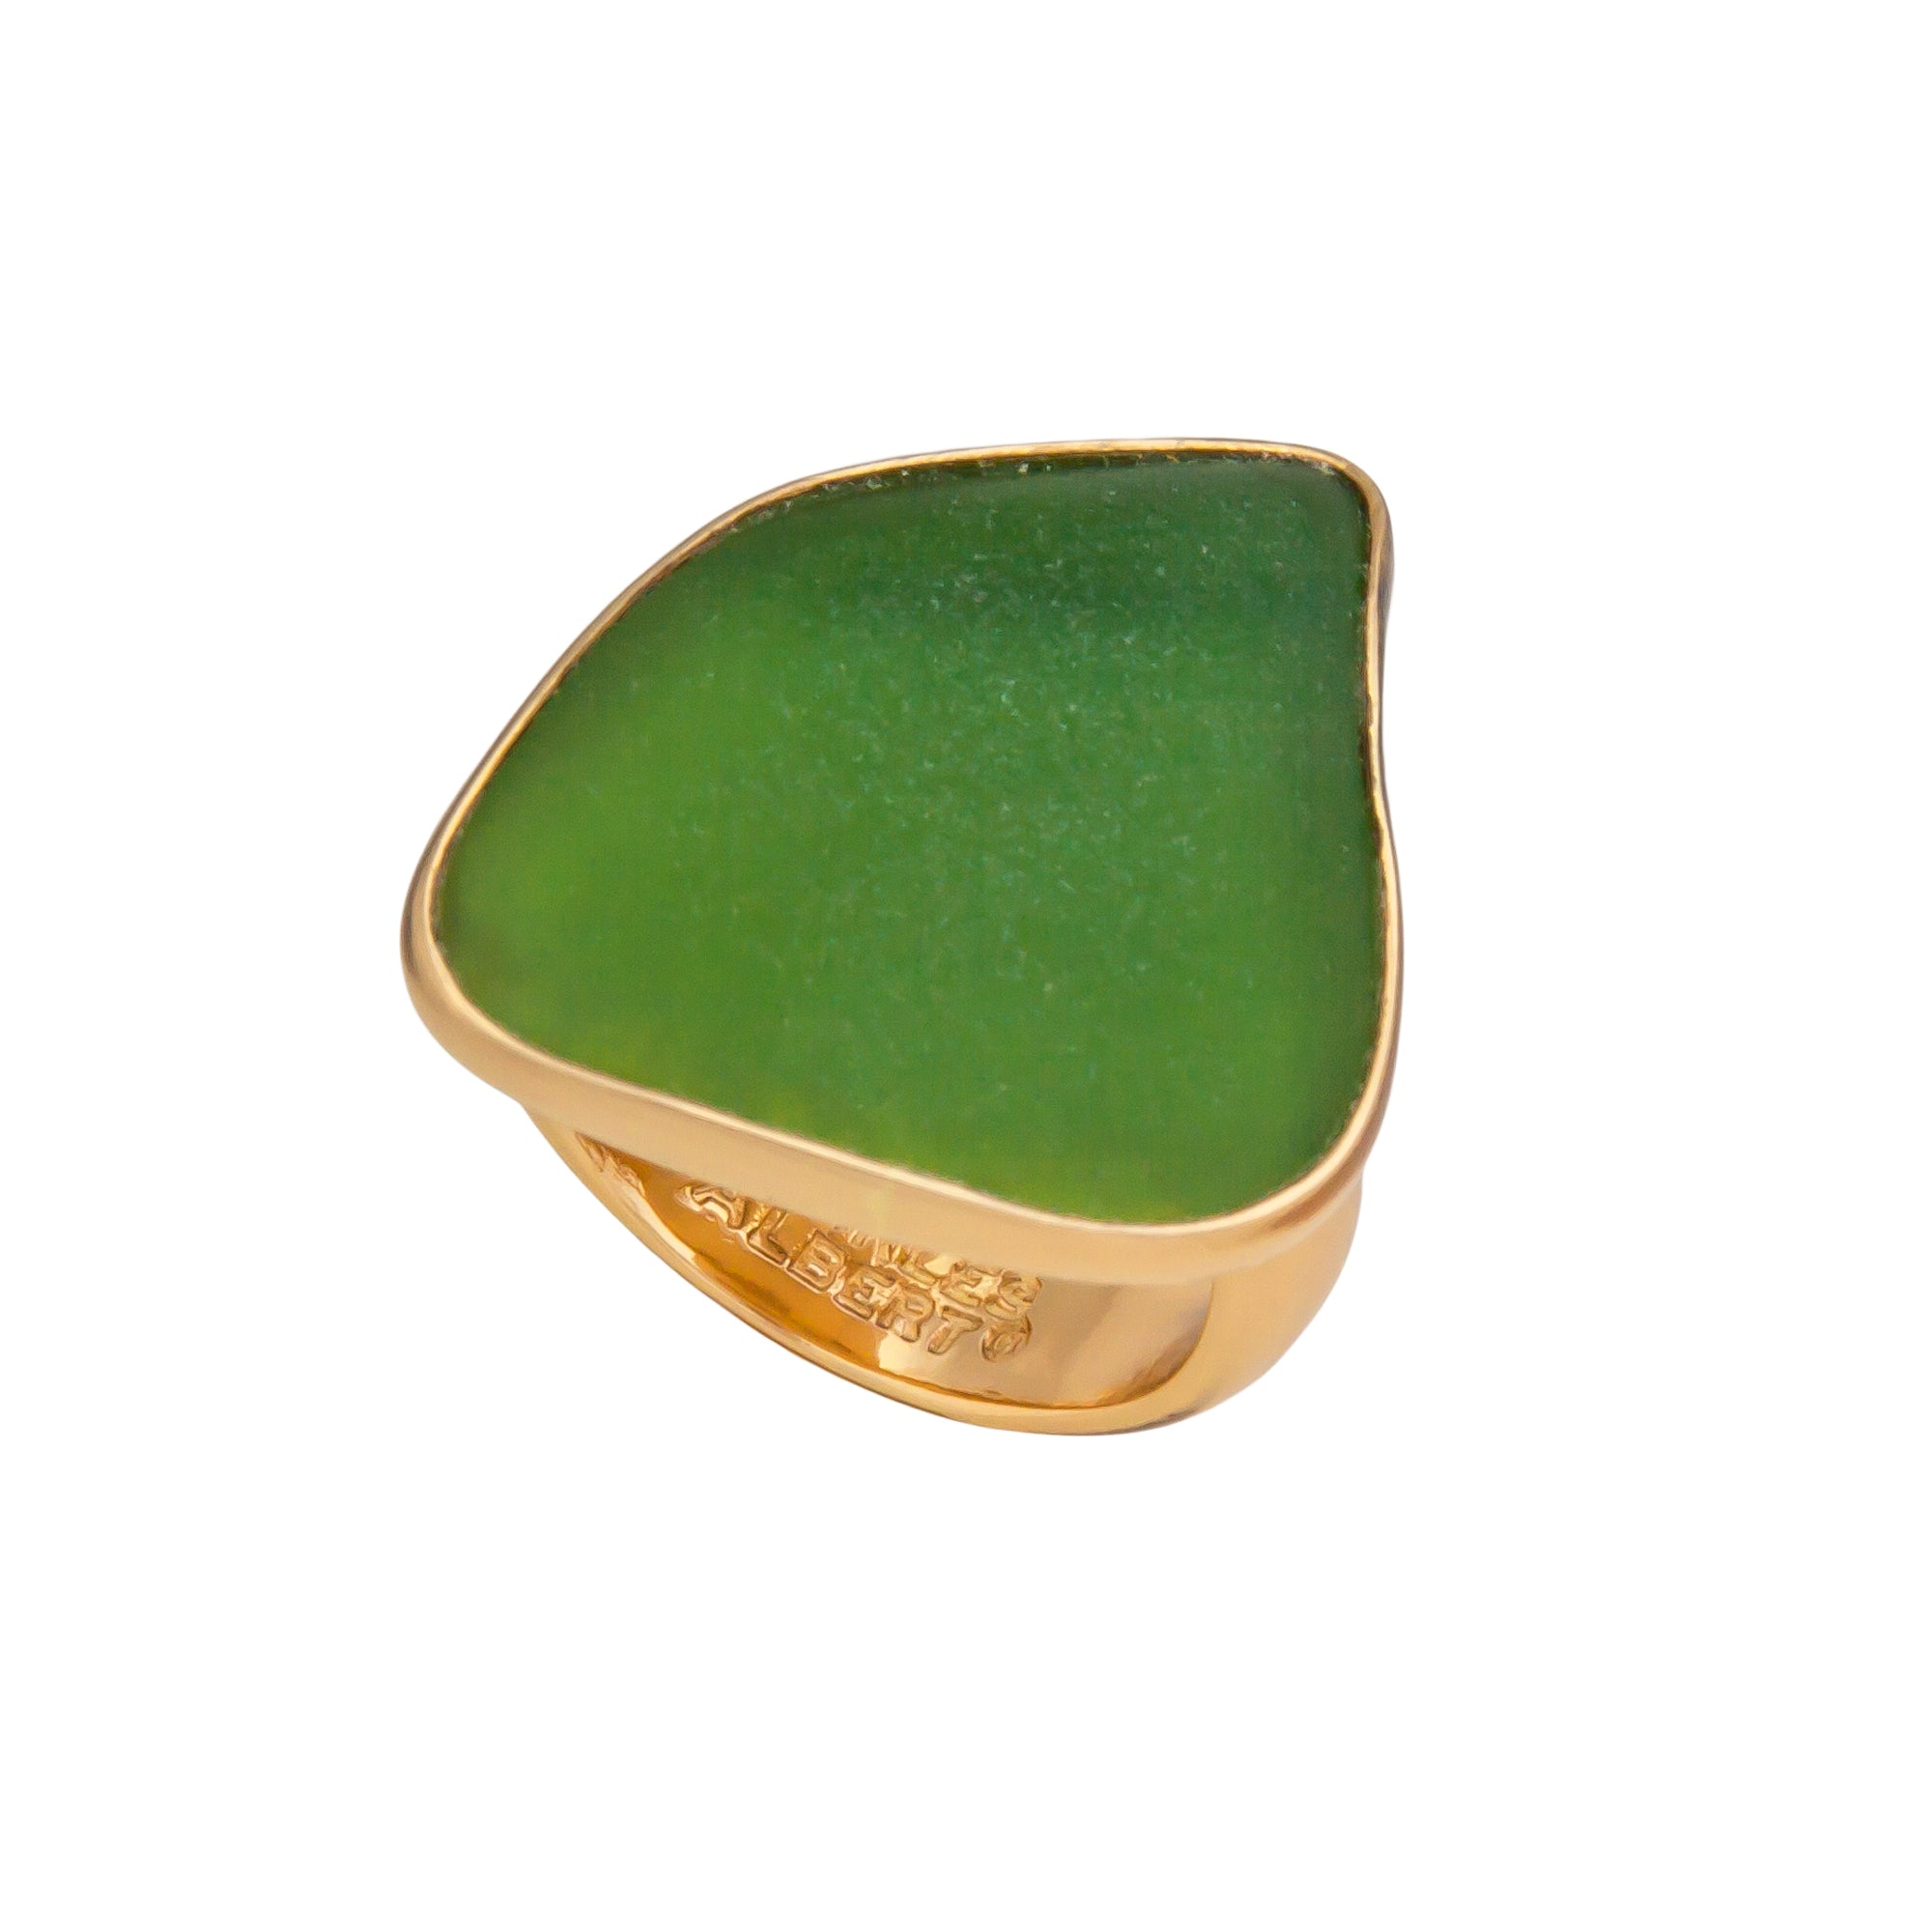 Alchemia Green Recycled Glass Adjustable Ring | Charles Albert Jewelry